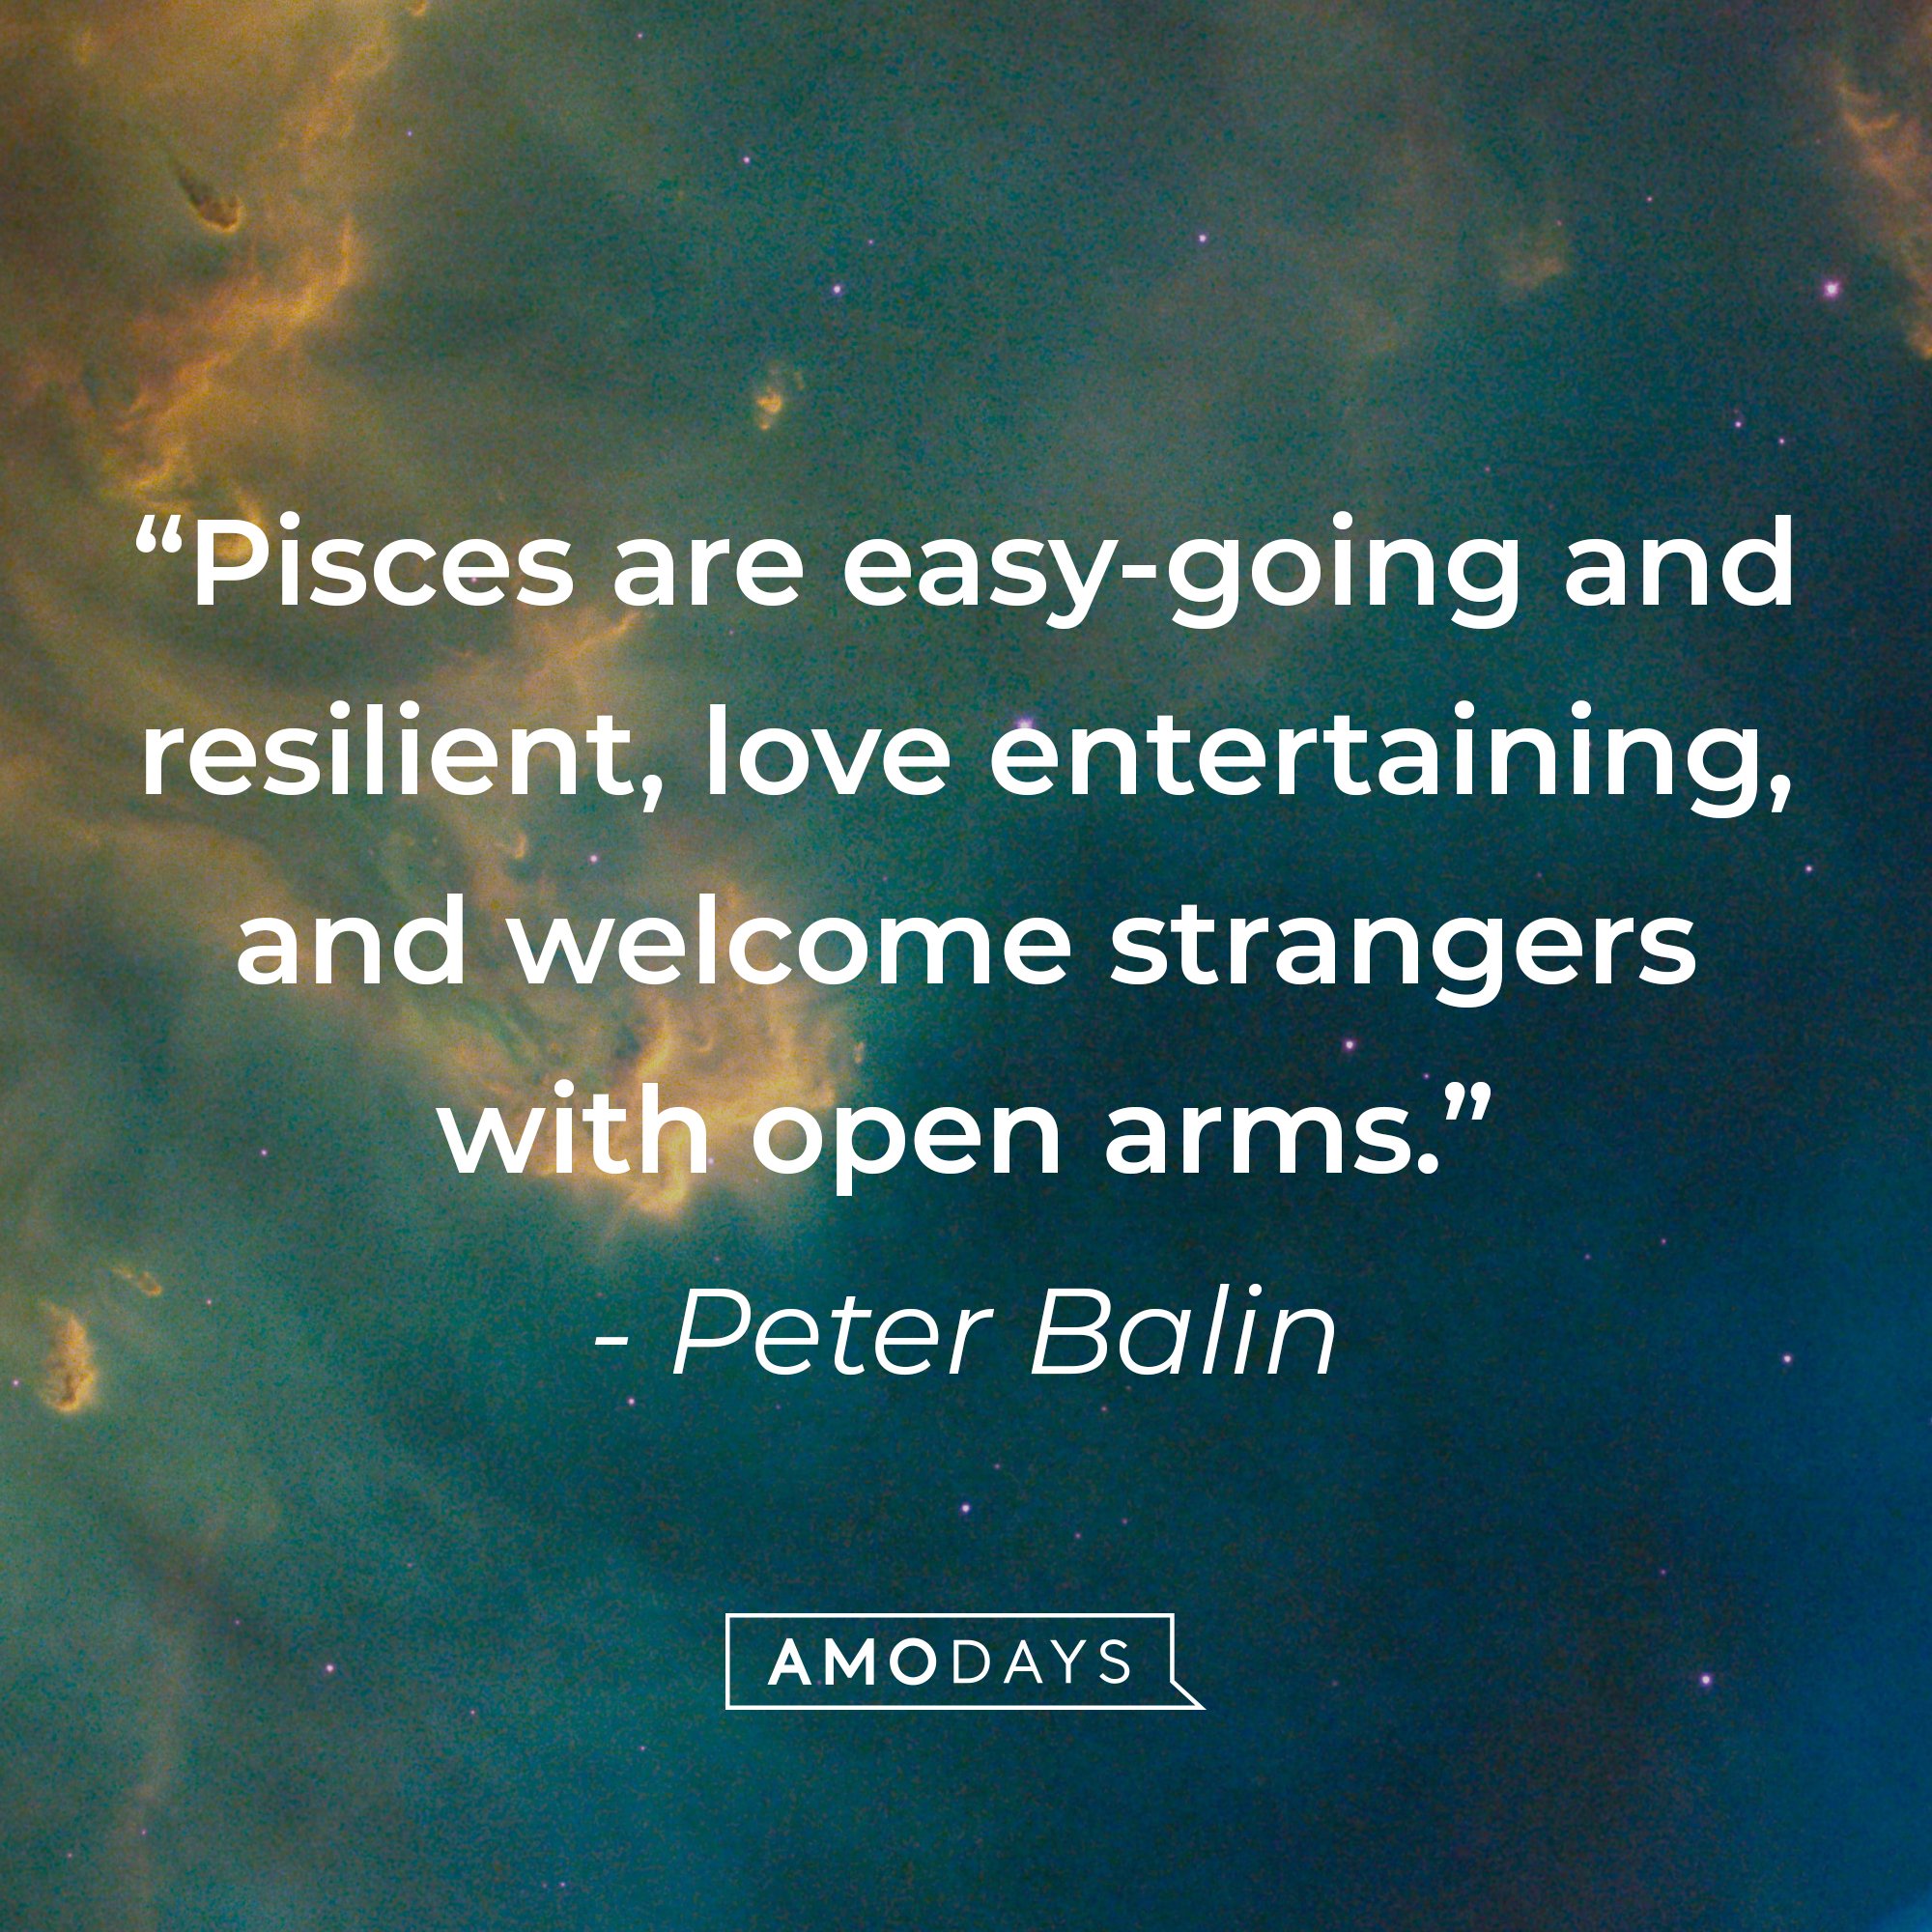 Peter Balin's quote: "Pisces are easy-going and resilient, love entertaining, and welcome strangers with open arms." | Image: AmoDays